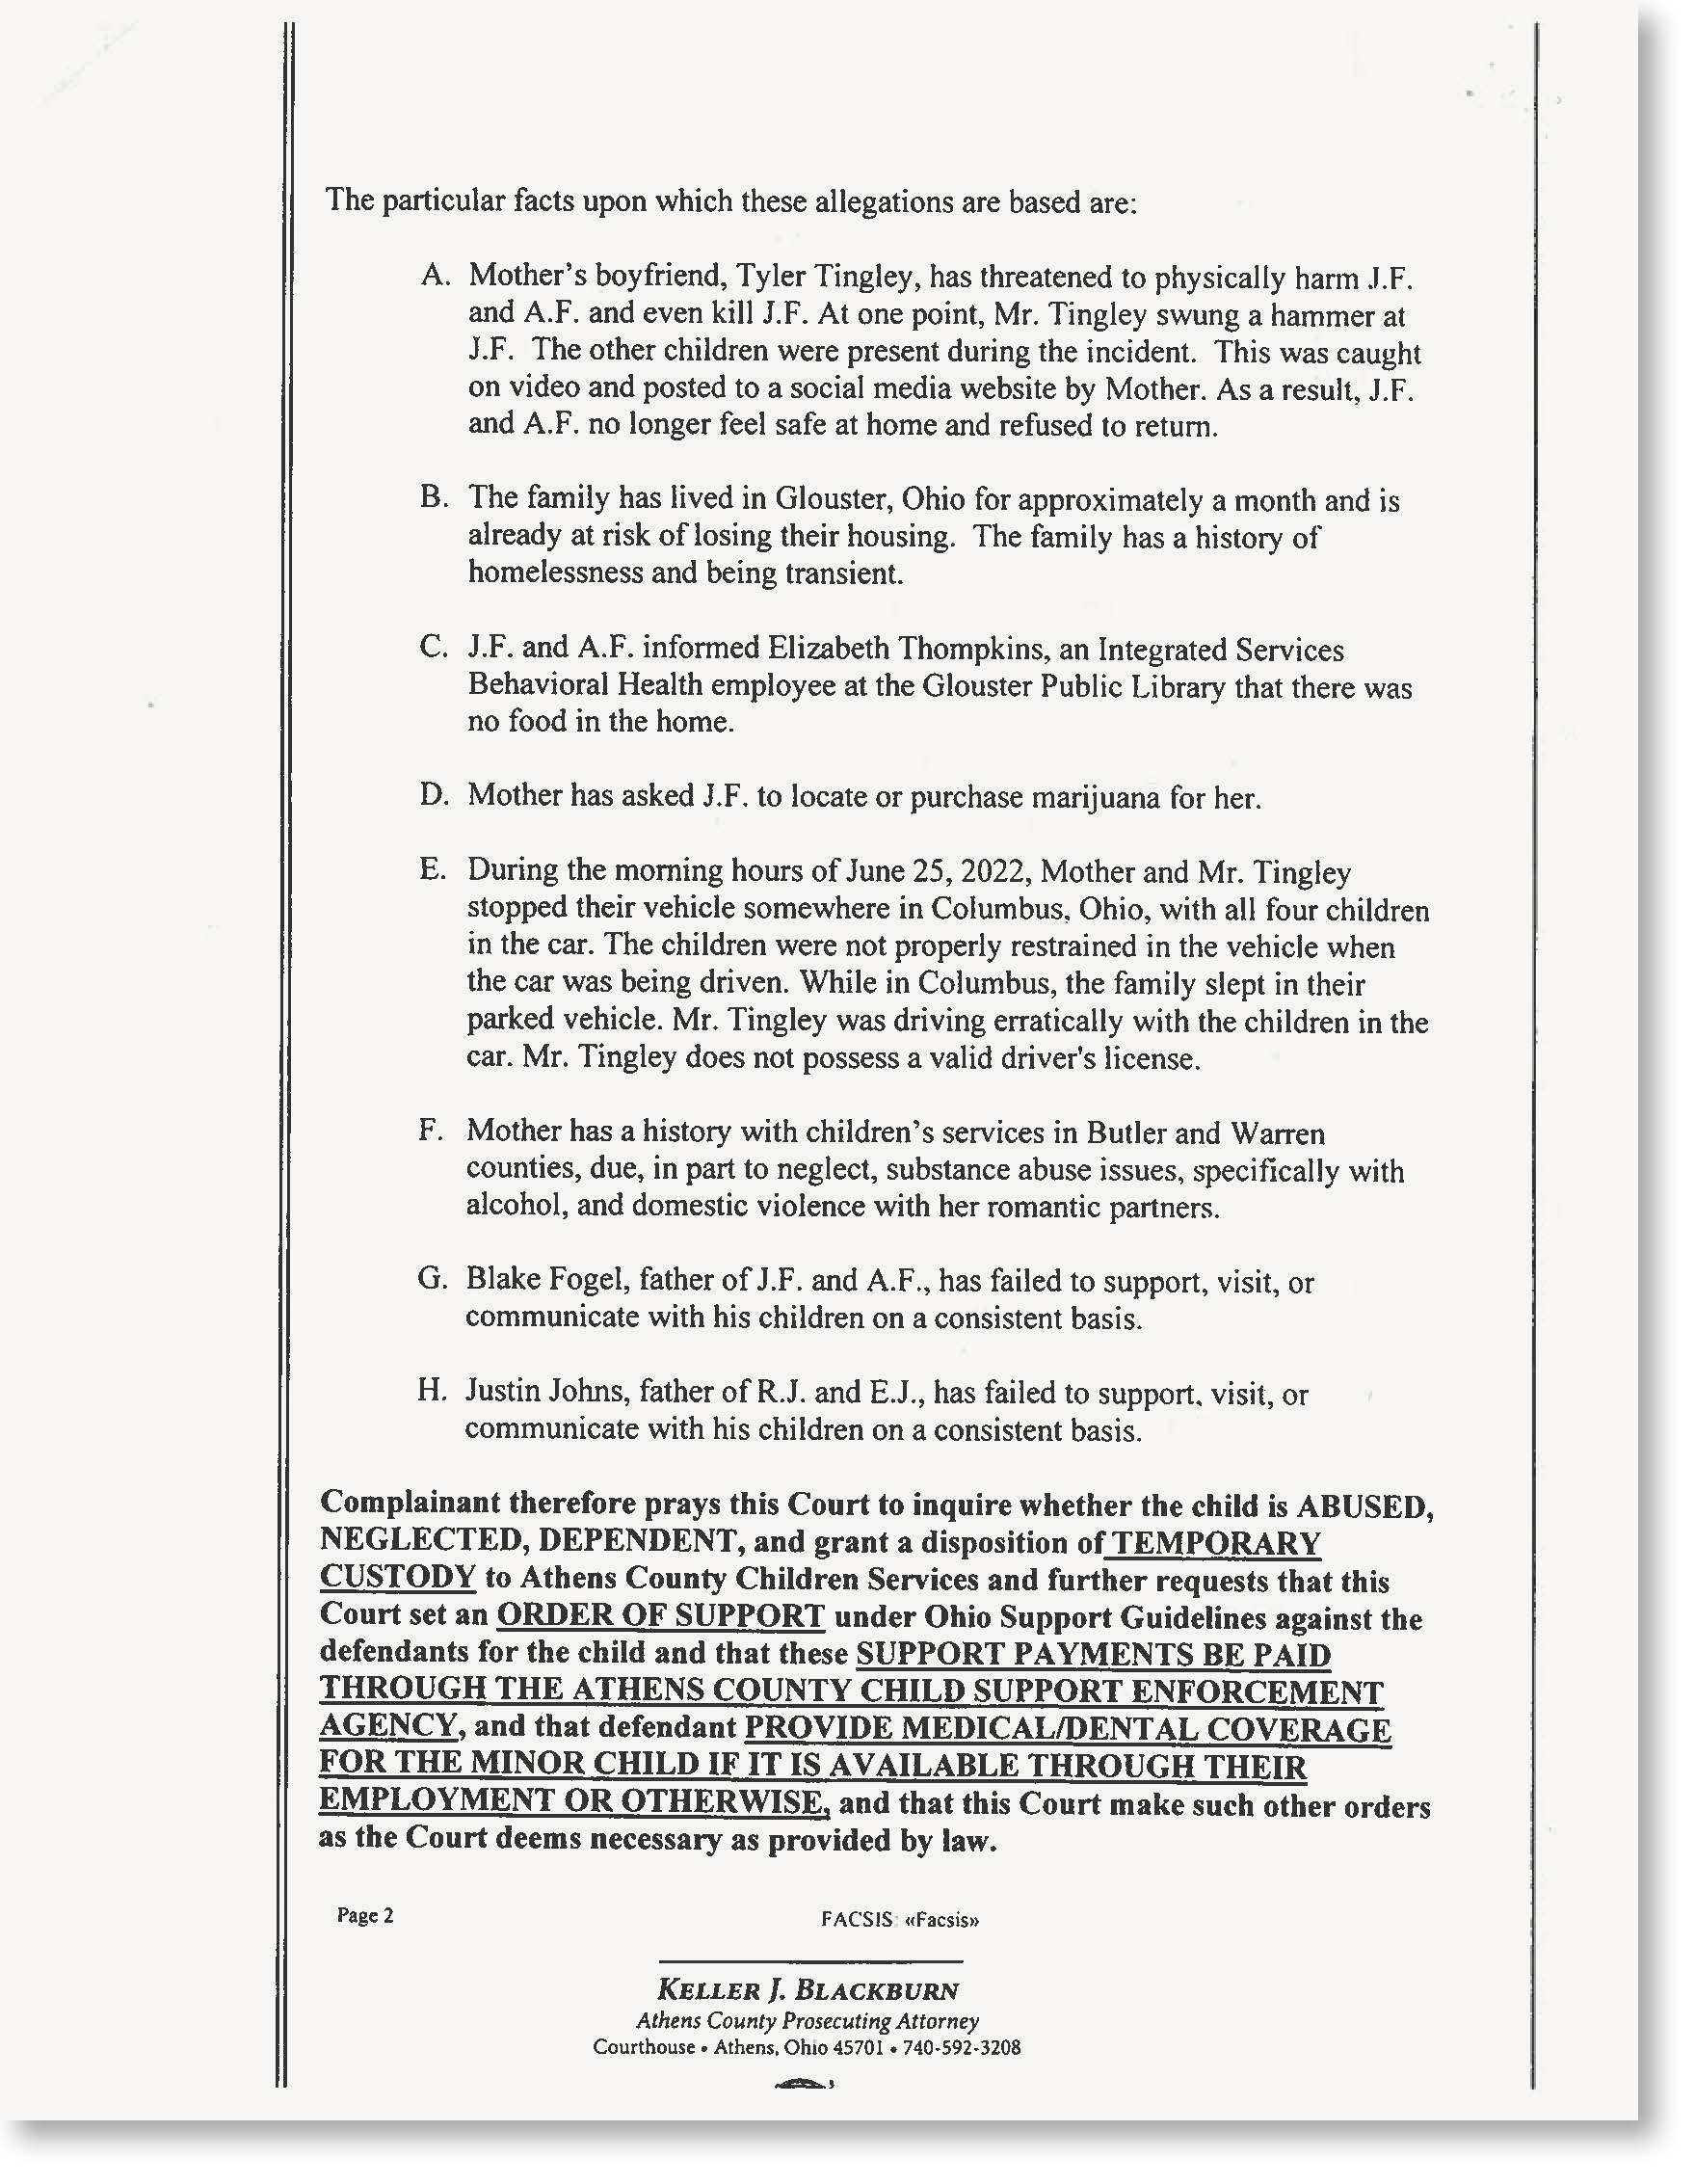 The list of allegations in the complaint against Theresa Fogel